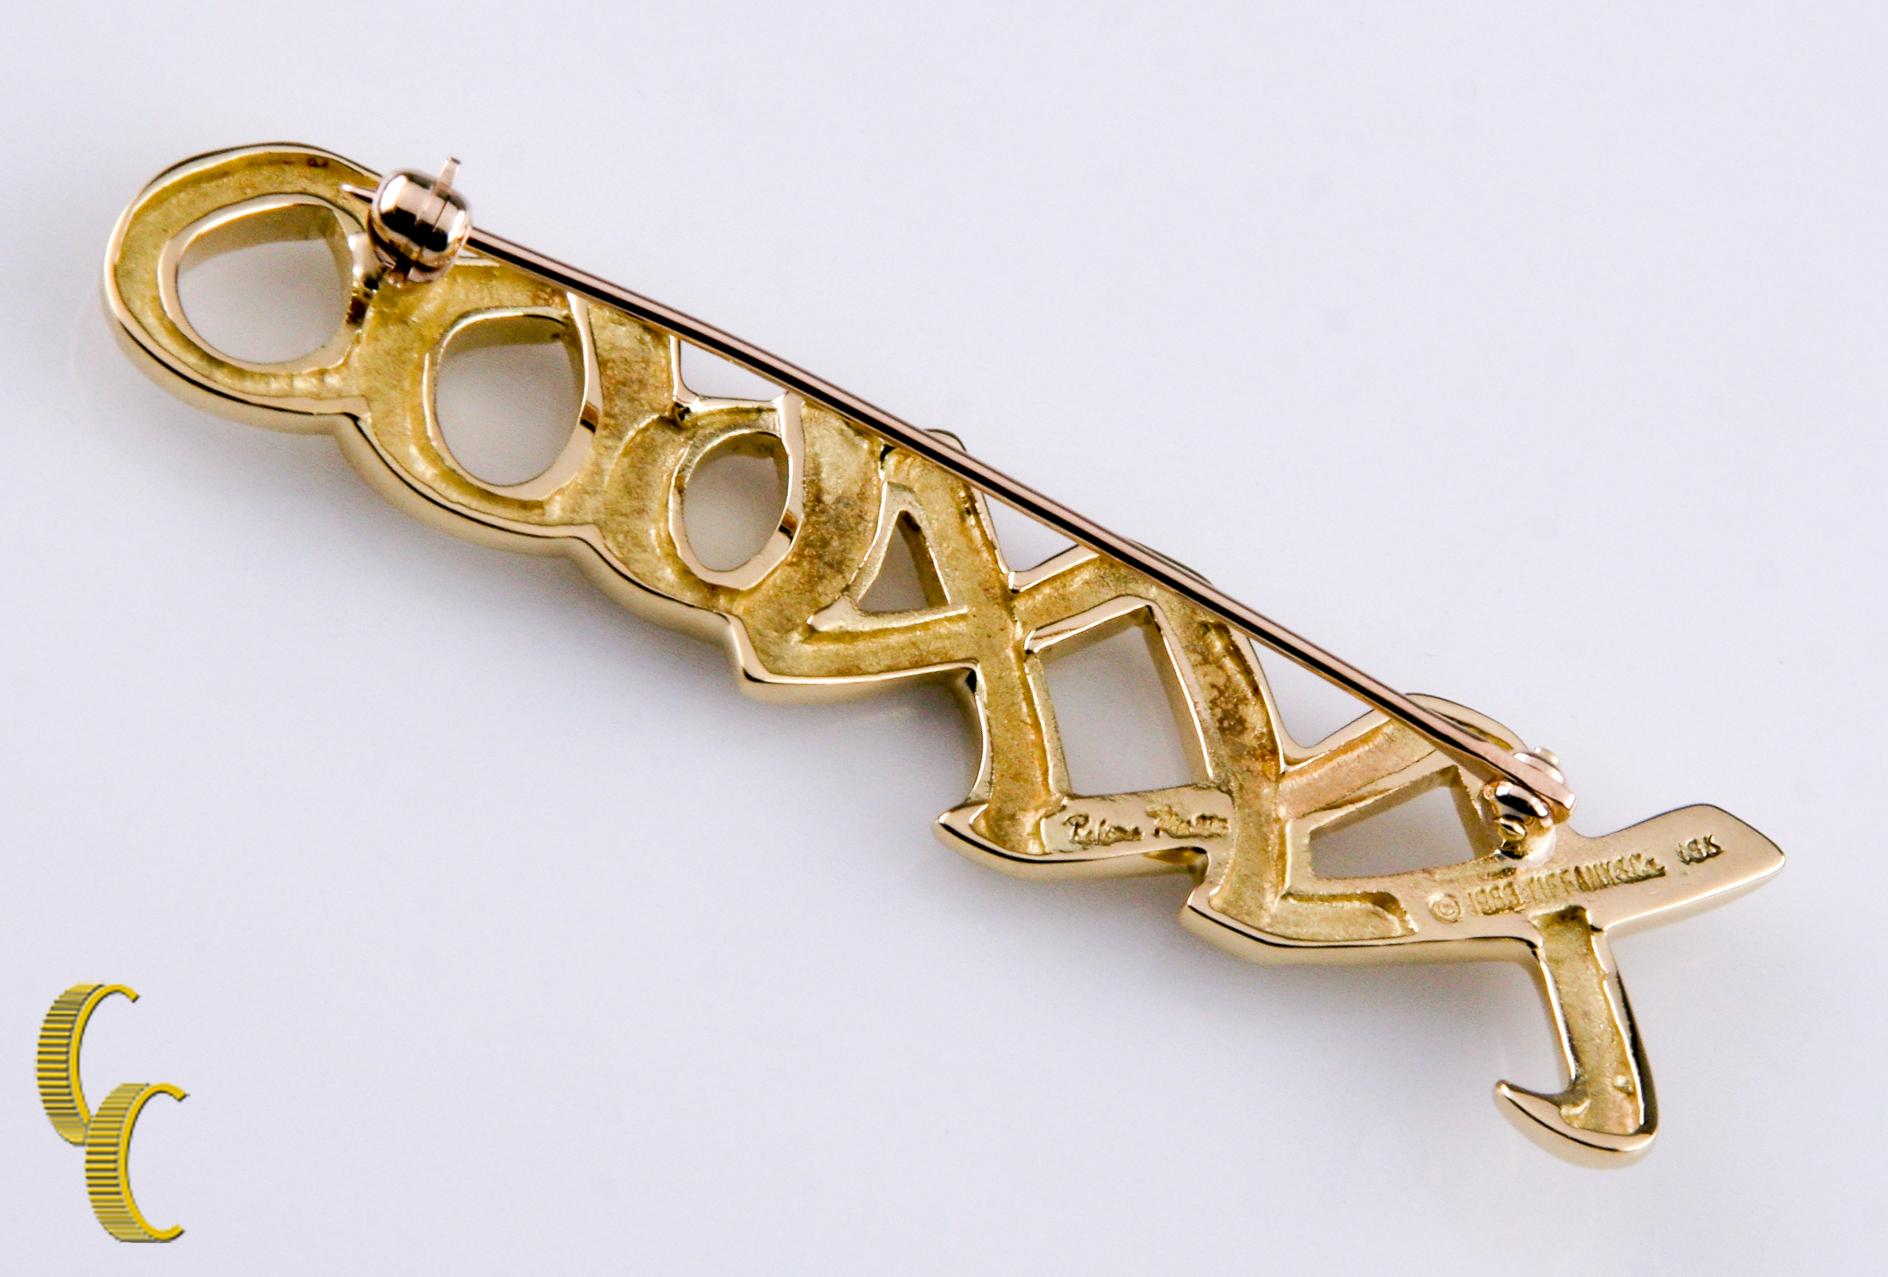 Gorgeous 18k Yellow Gold Brooch by Paloma Picasso for Tiffany & Co.
Reads 